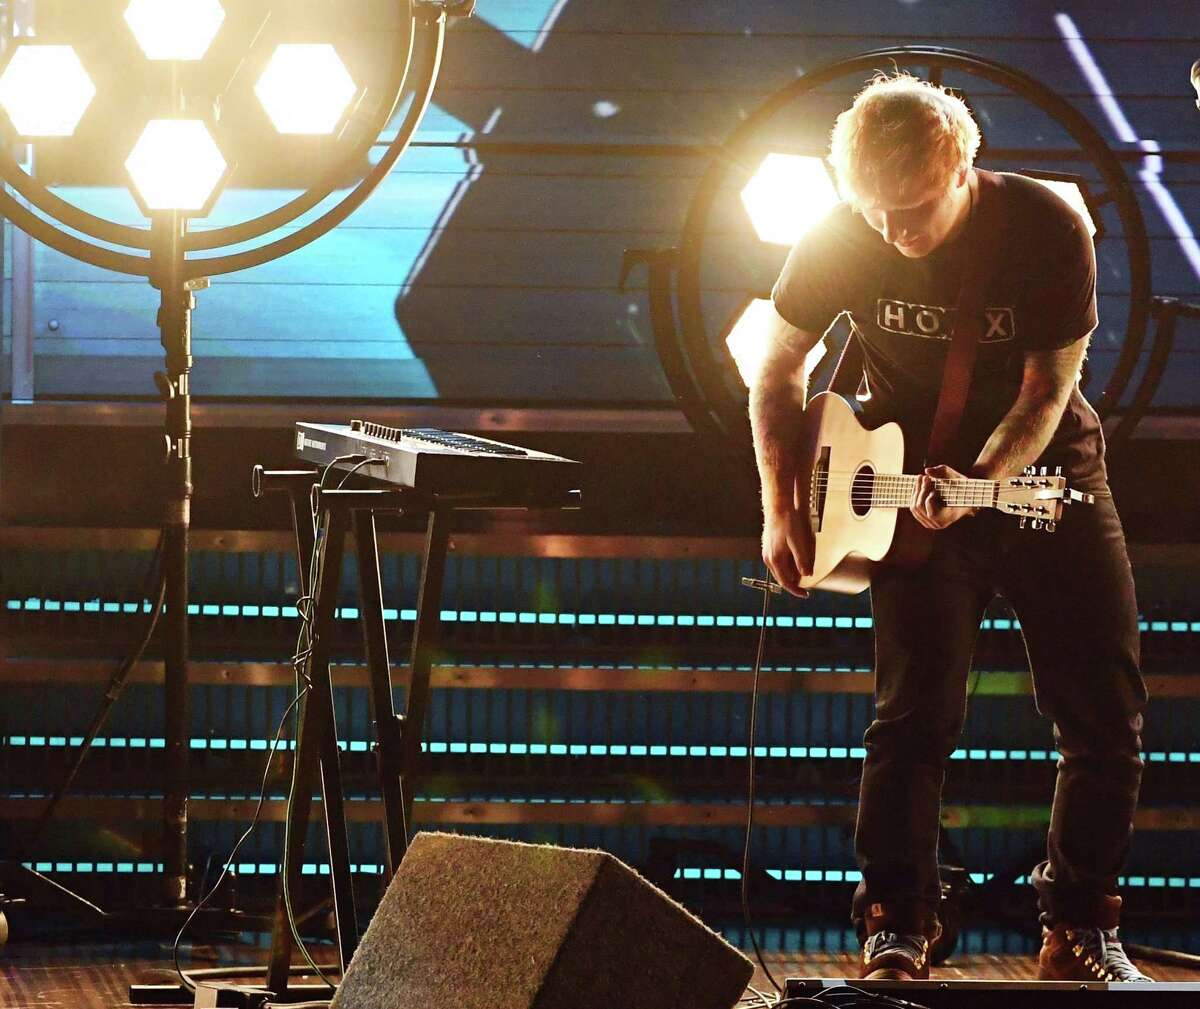 He performs alone Though he’s touring arenas, Ed Sheeran continues to perform without a band.